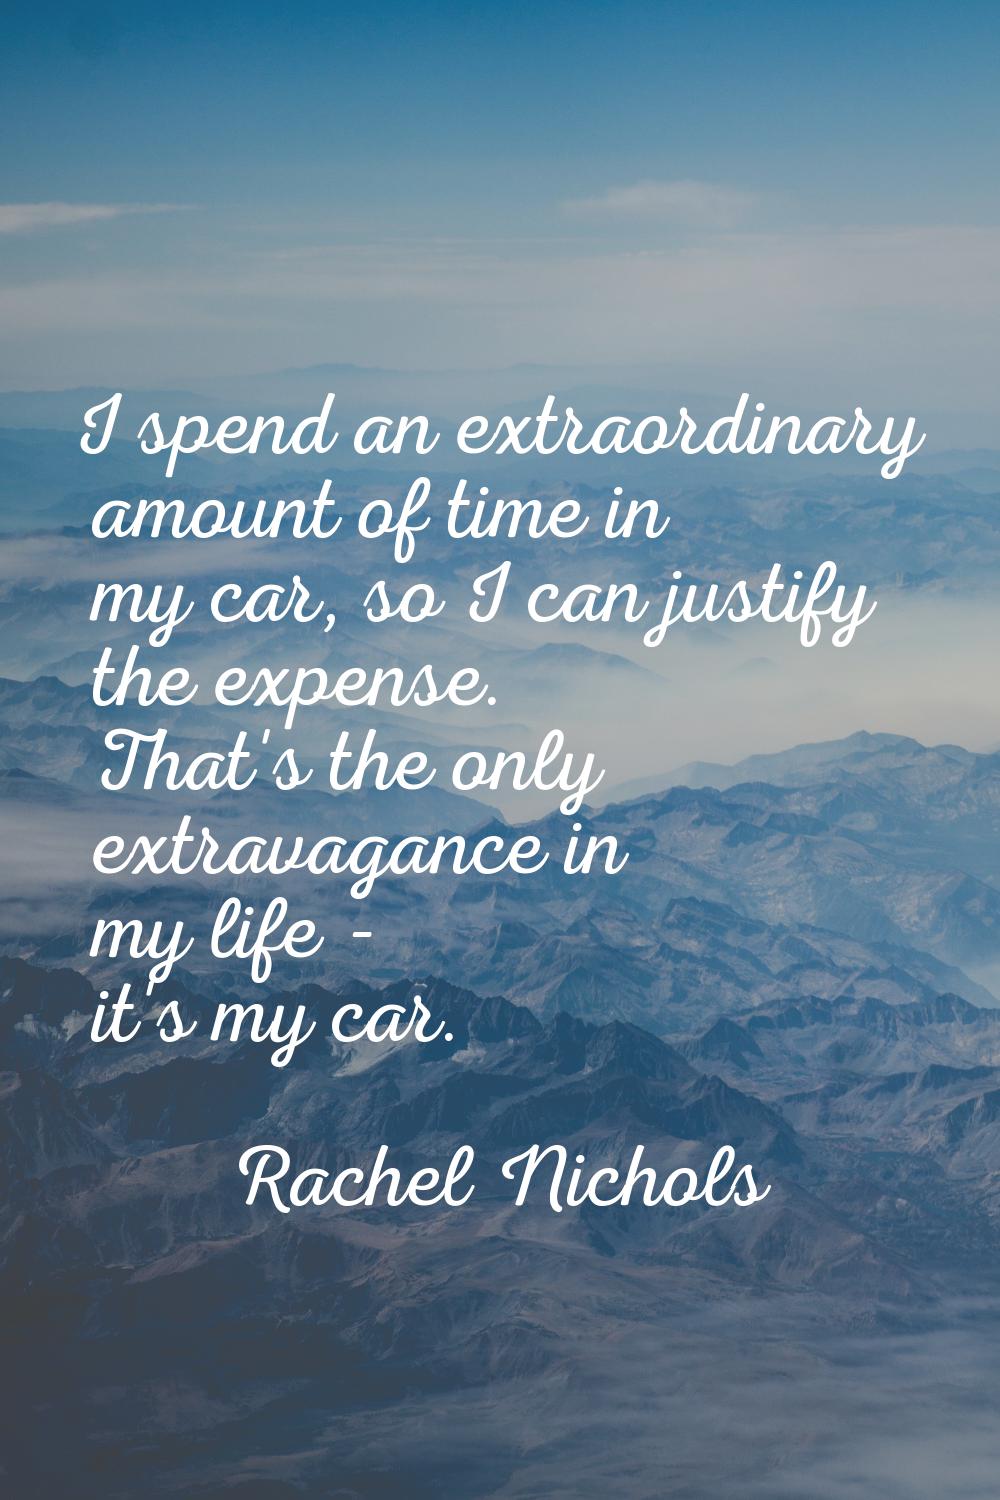 I spend an extraordinary amount of time in my car, so I can justify the expense. That's the only ex